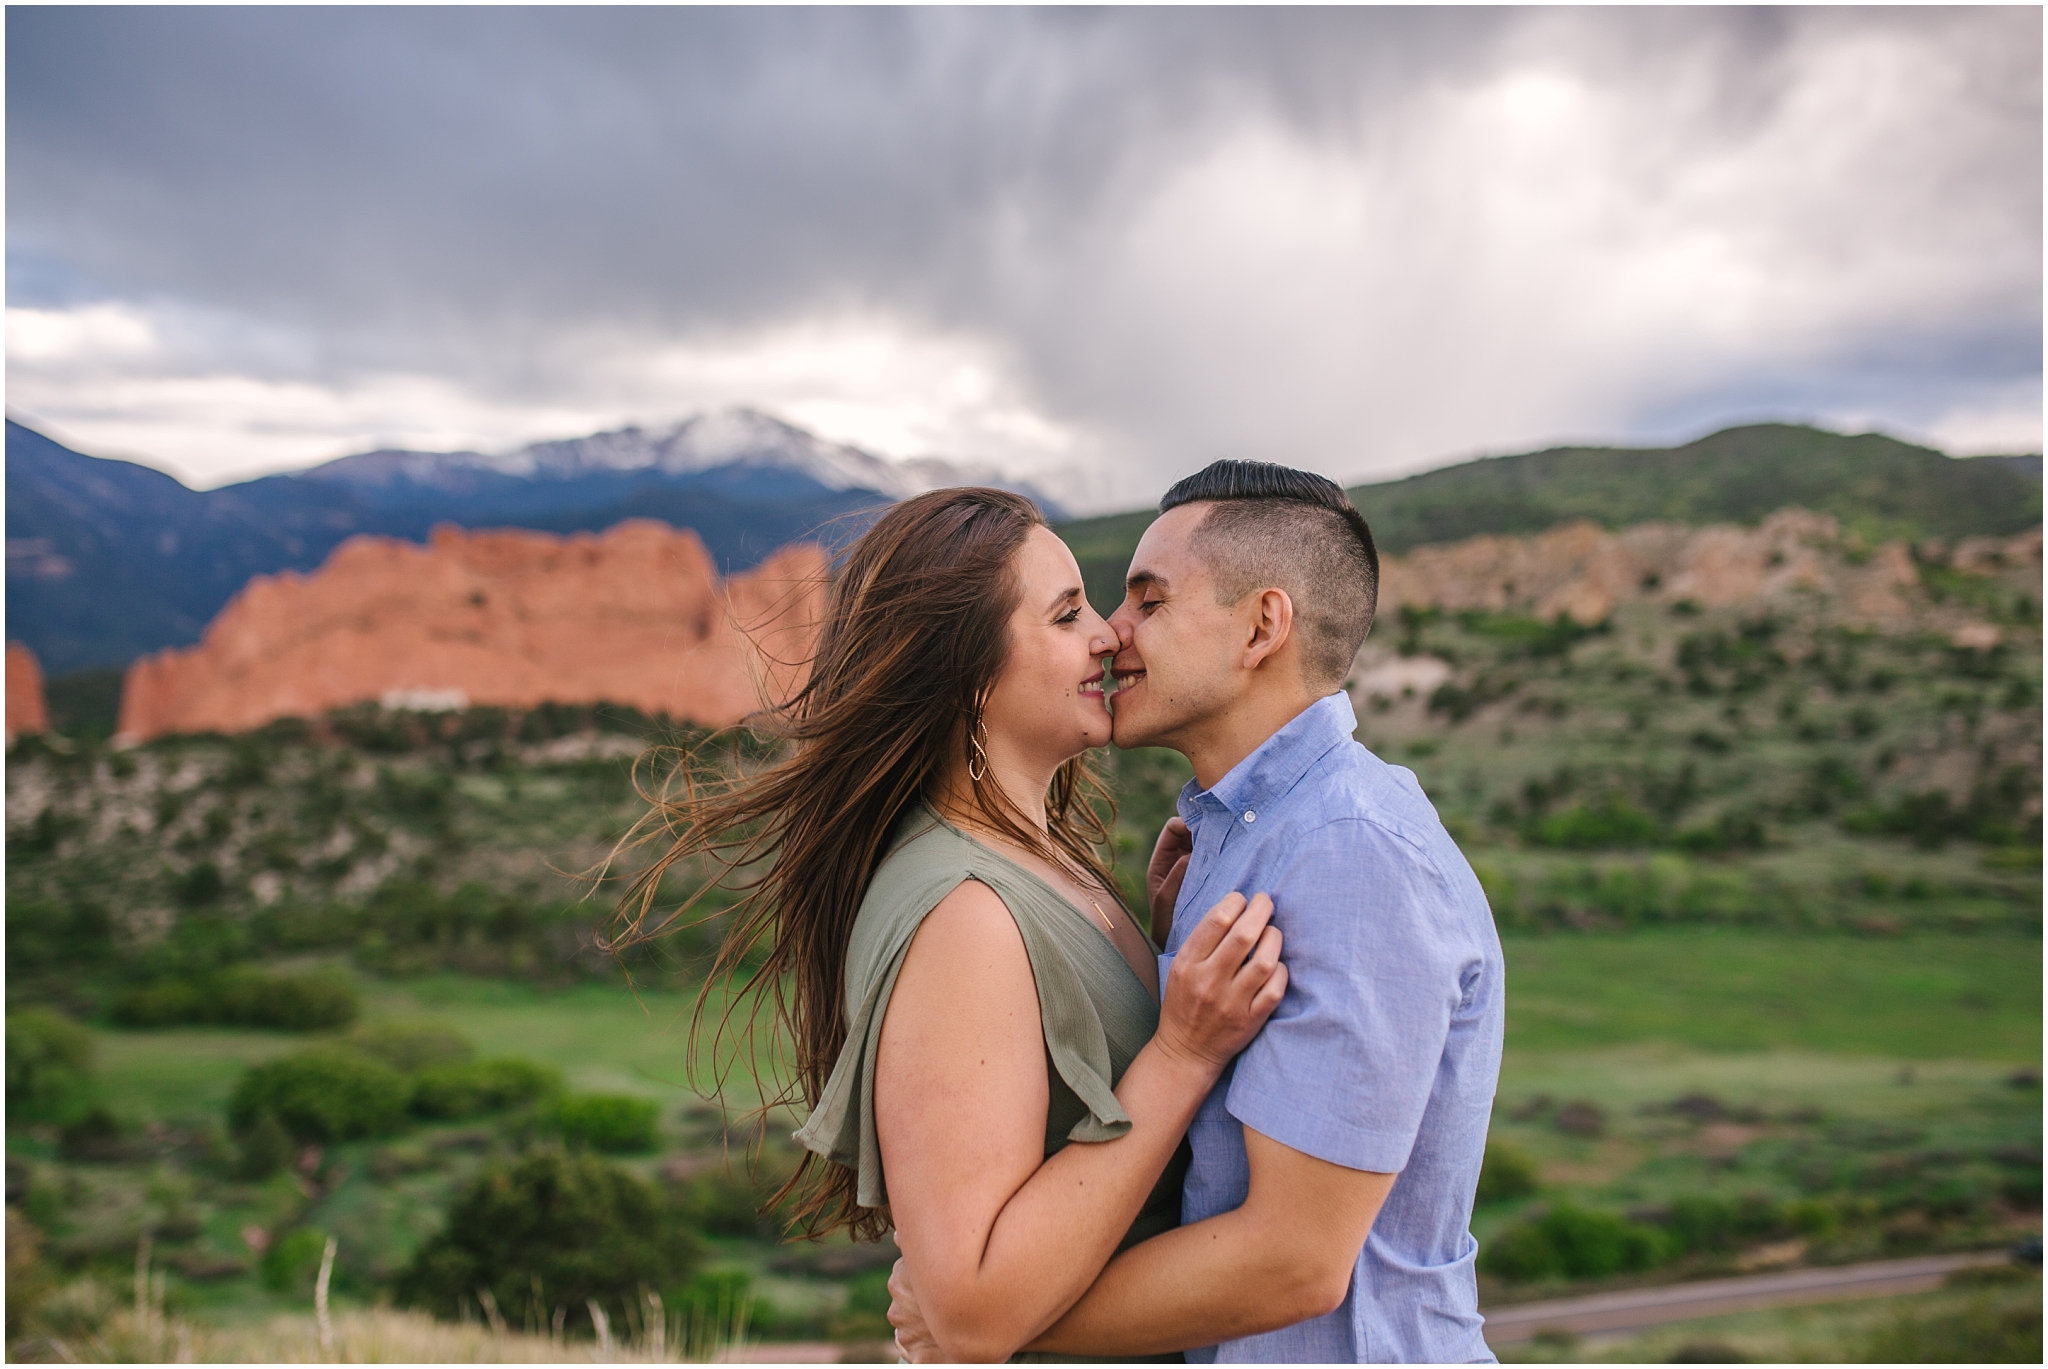 Garden of the Gods - Favorite Colorado Mountain Locations for Adventurous Engagement Pictures